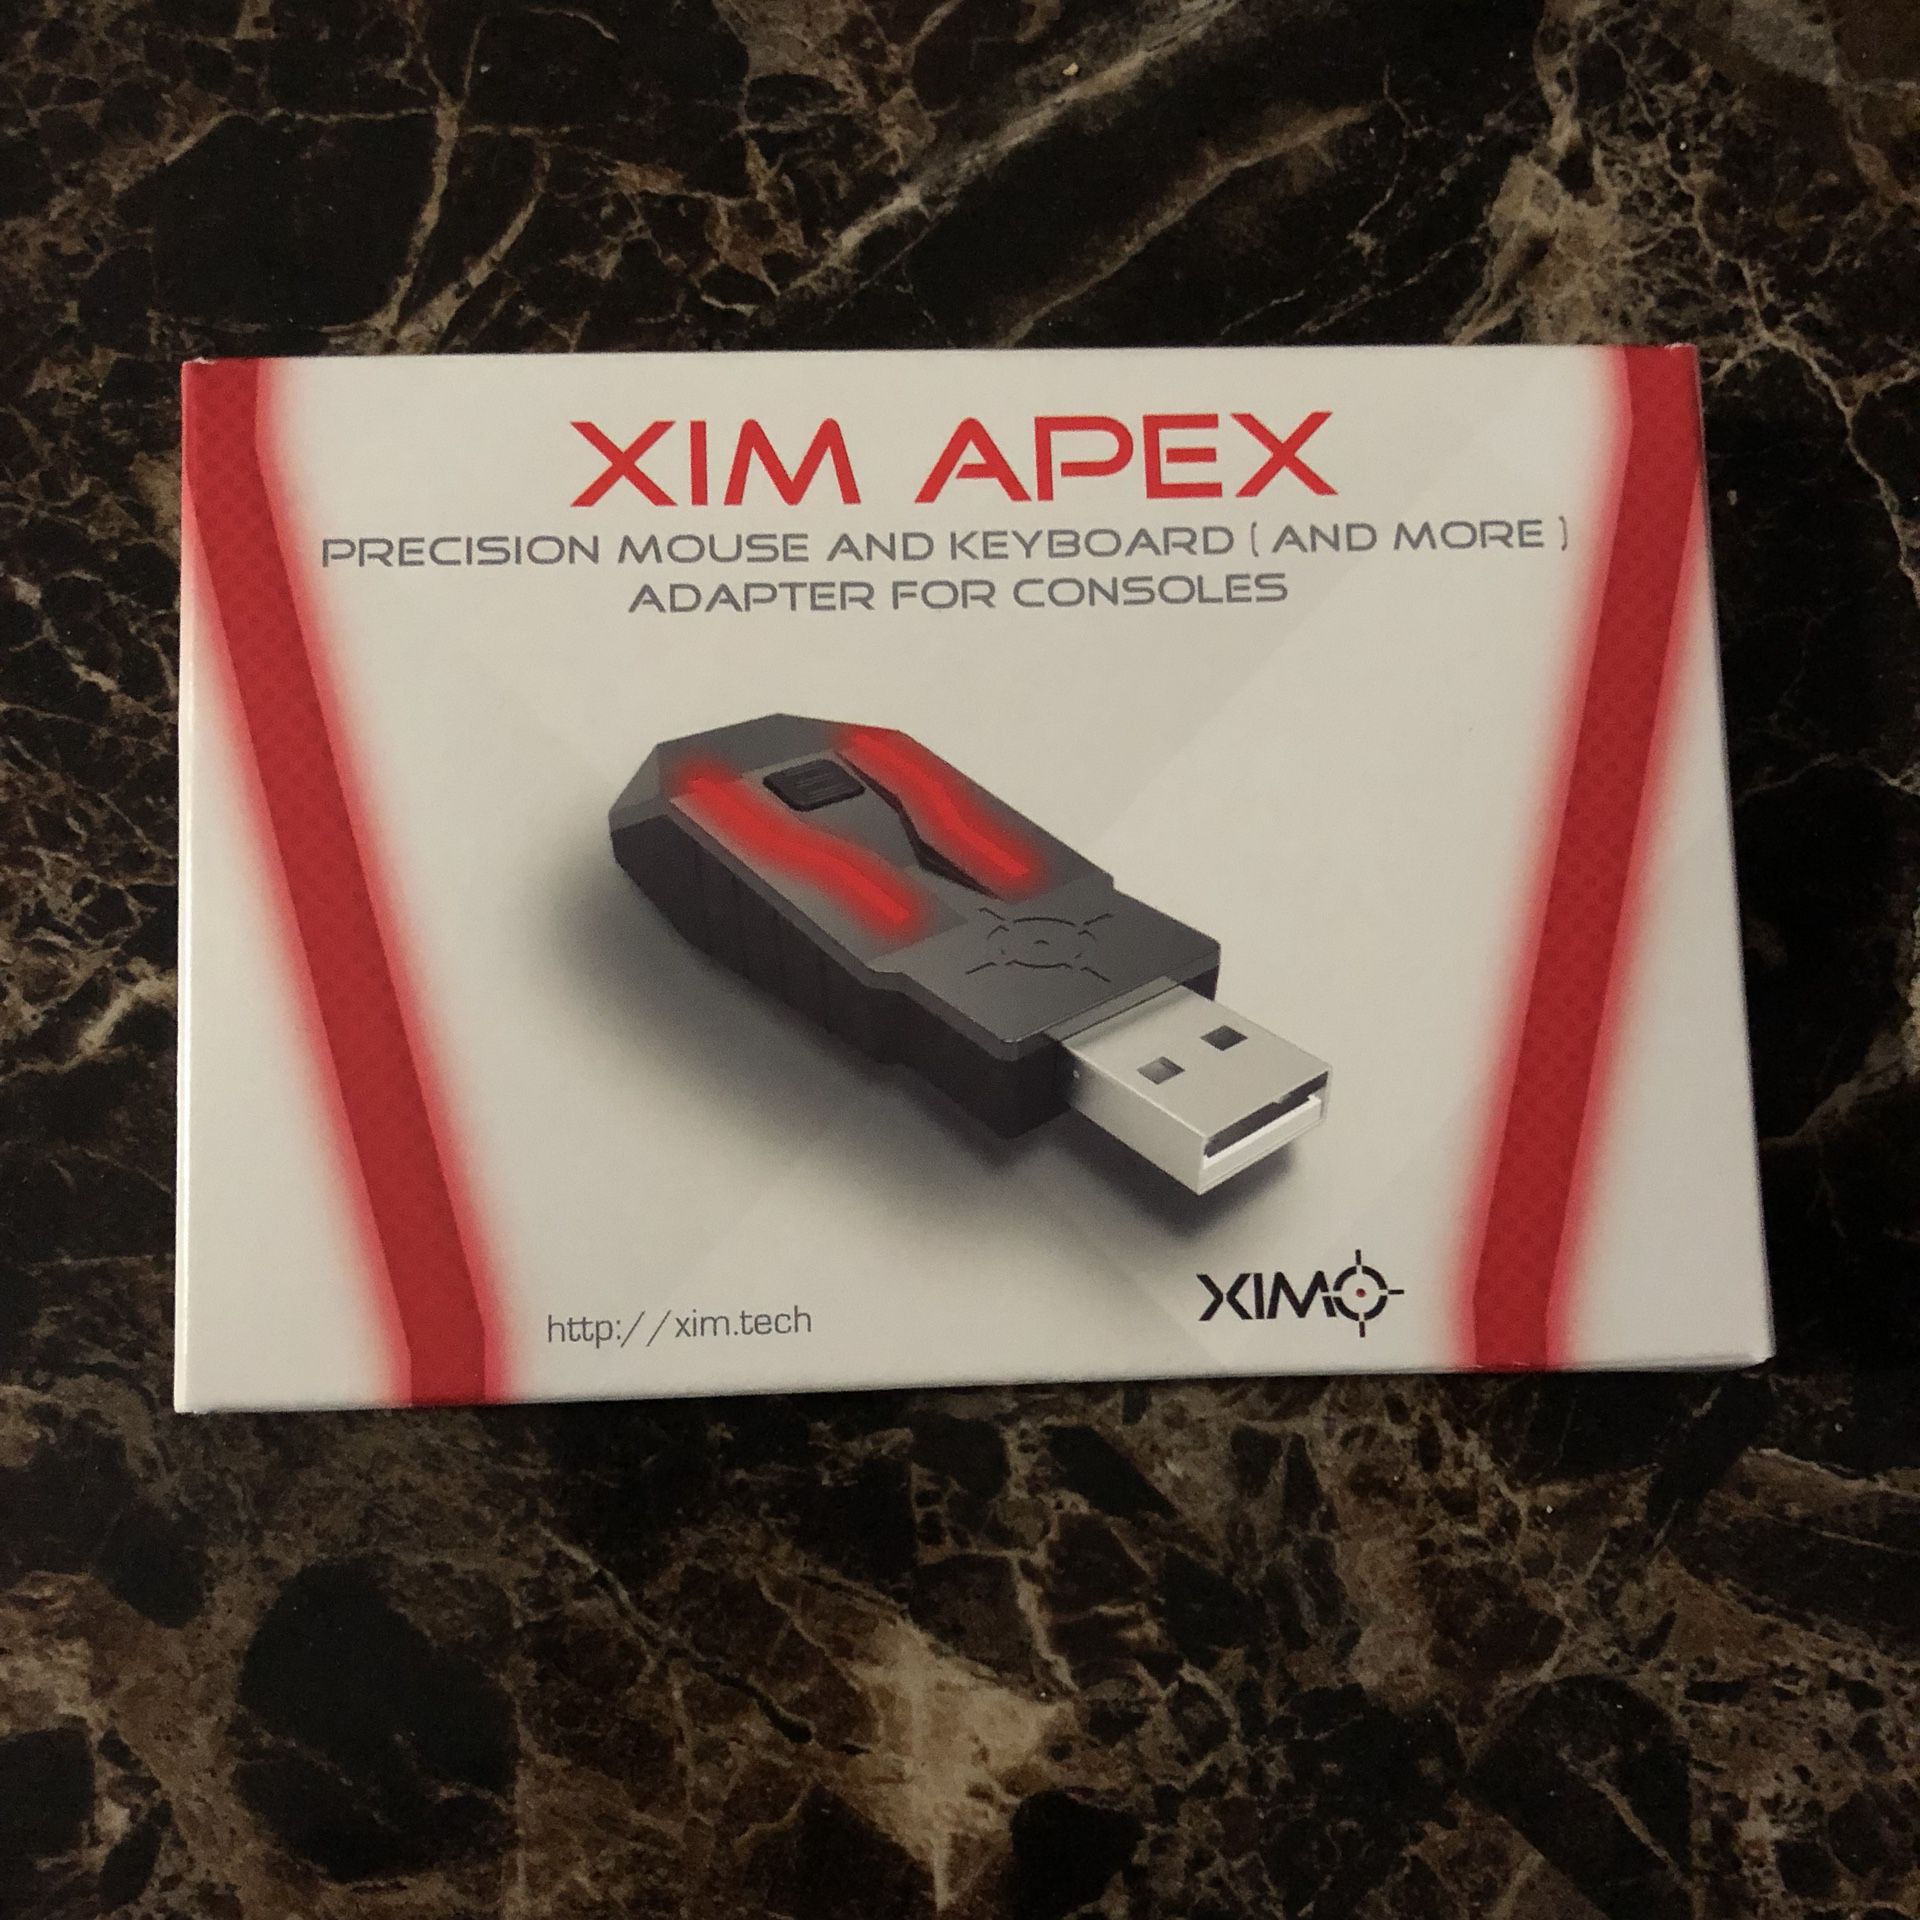 Xim apex keyboard and mouse adapter for Sale in Chicago, IL